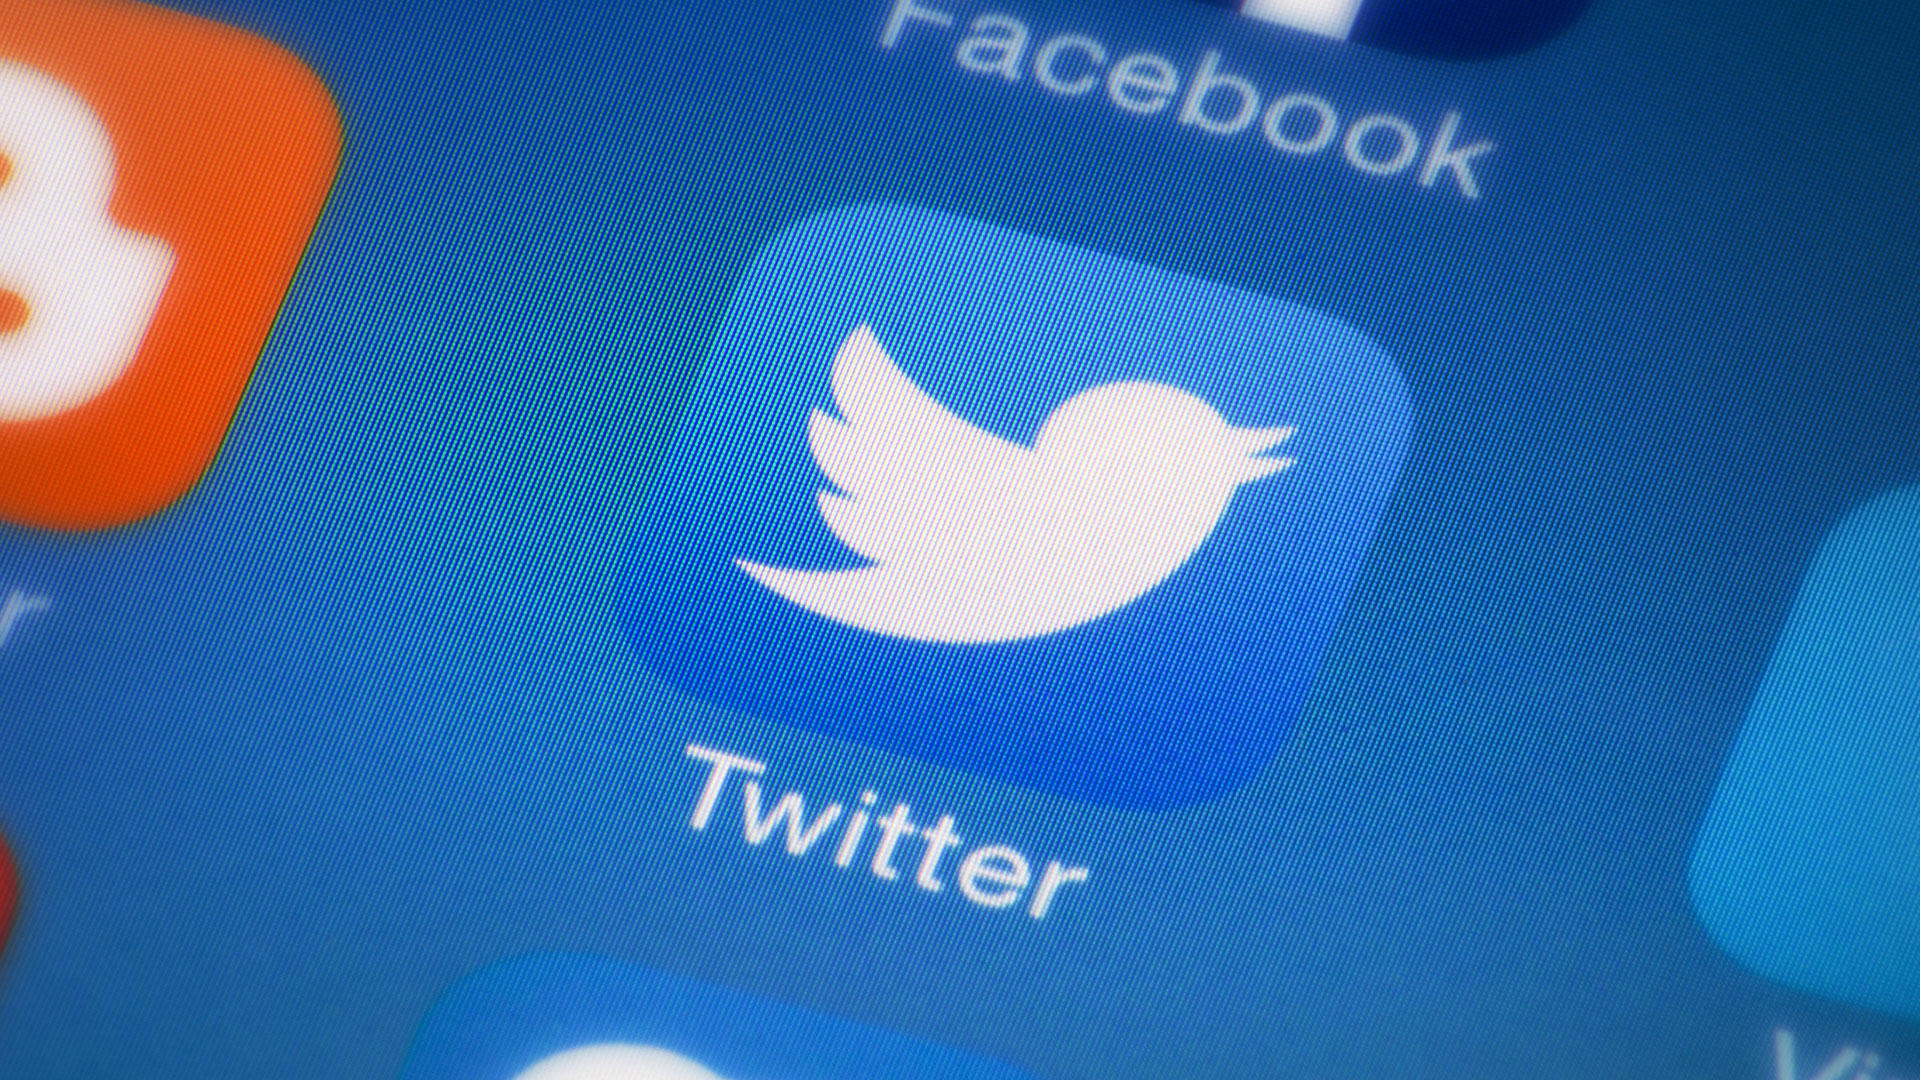 Twitter rolls out global 'hide replies' feature to give users more control